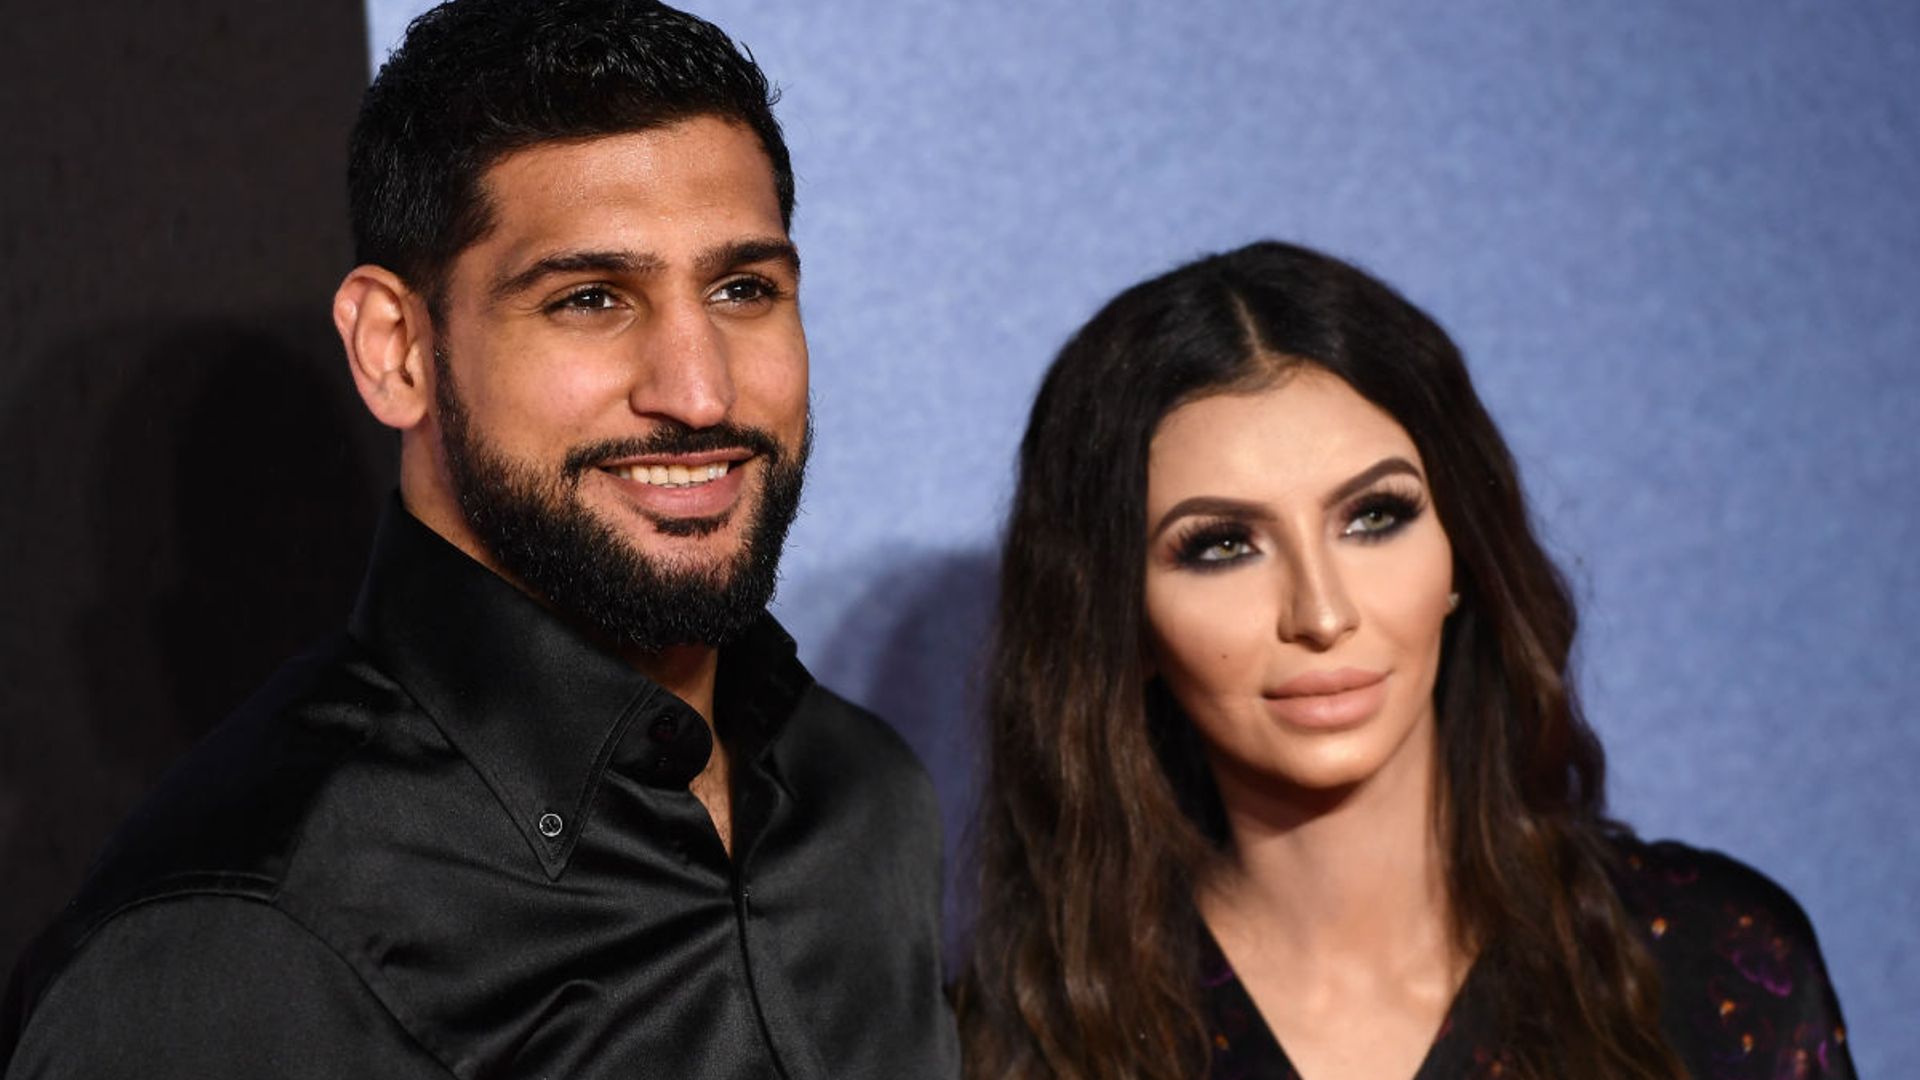 Amir Khan's wife Faryal Makhdoom opens up about her marriage | HELLO!